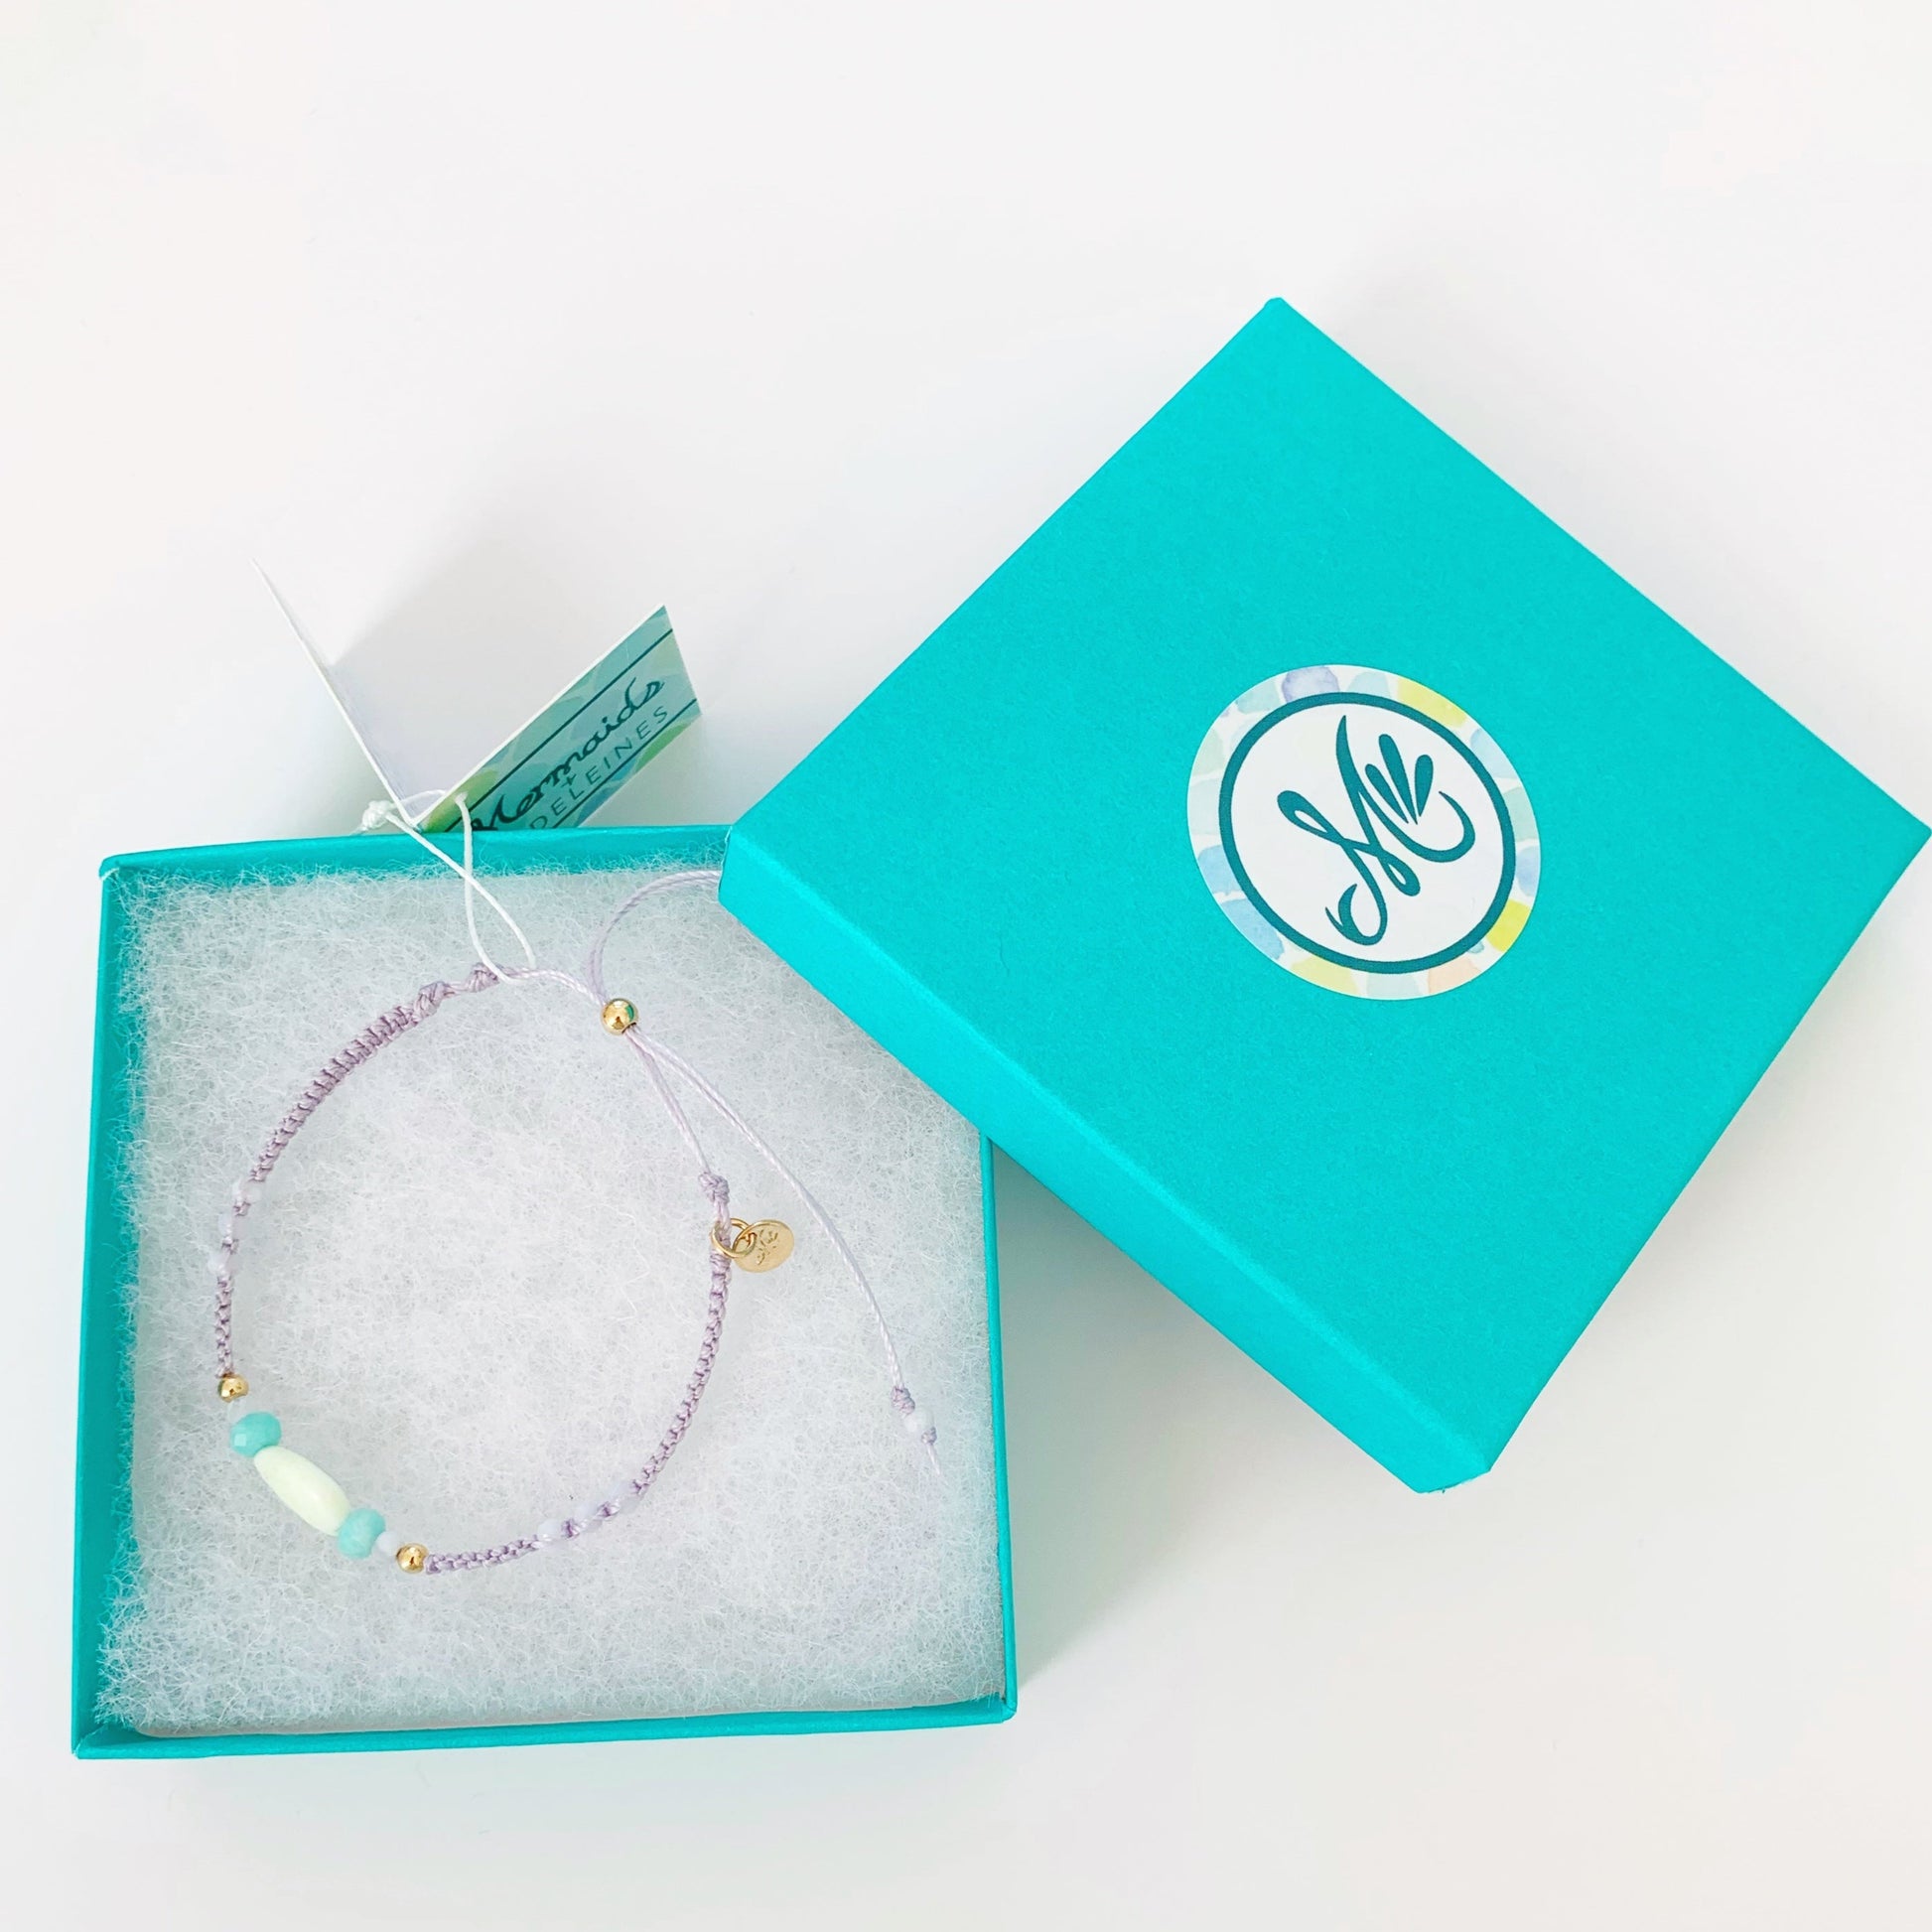 The coastal haze captiva macrame bracelets photographed in a teal mermaids and madeleines gift box on a white surface